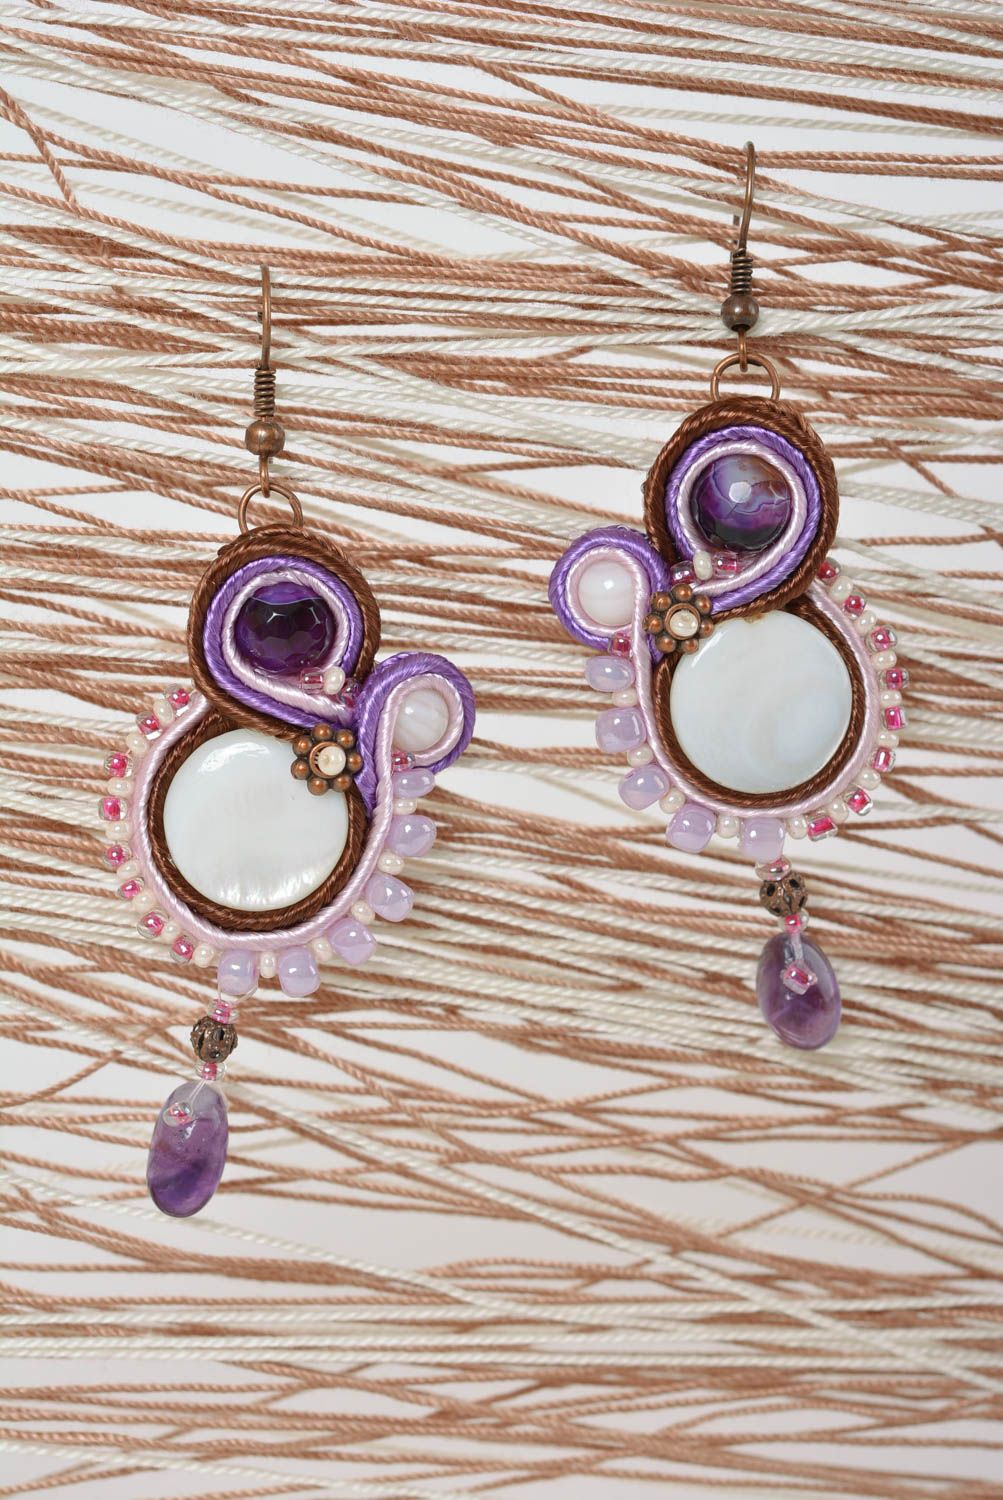 Soutache earrings handmade earrings evening accessories with amethyst stones photo 1